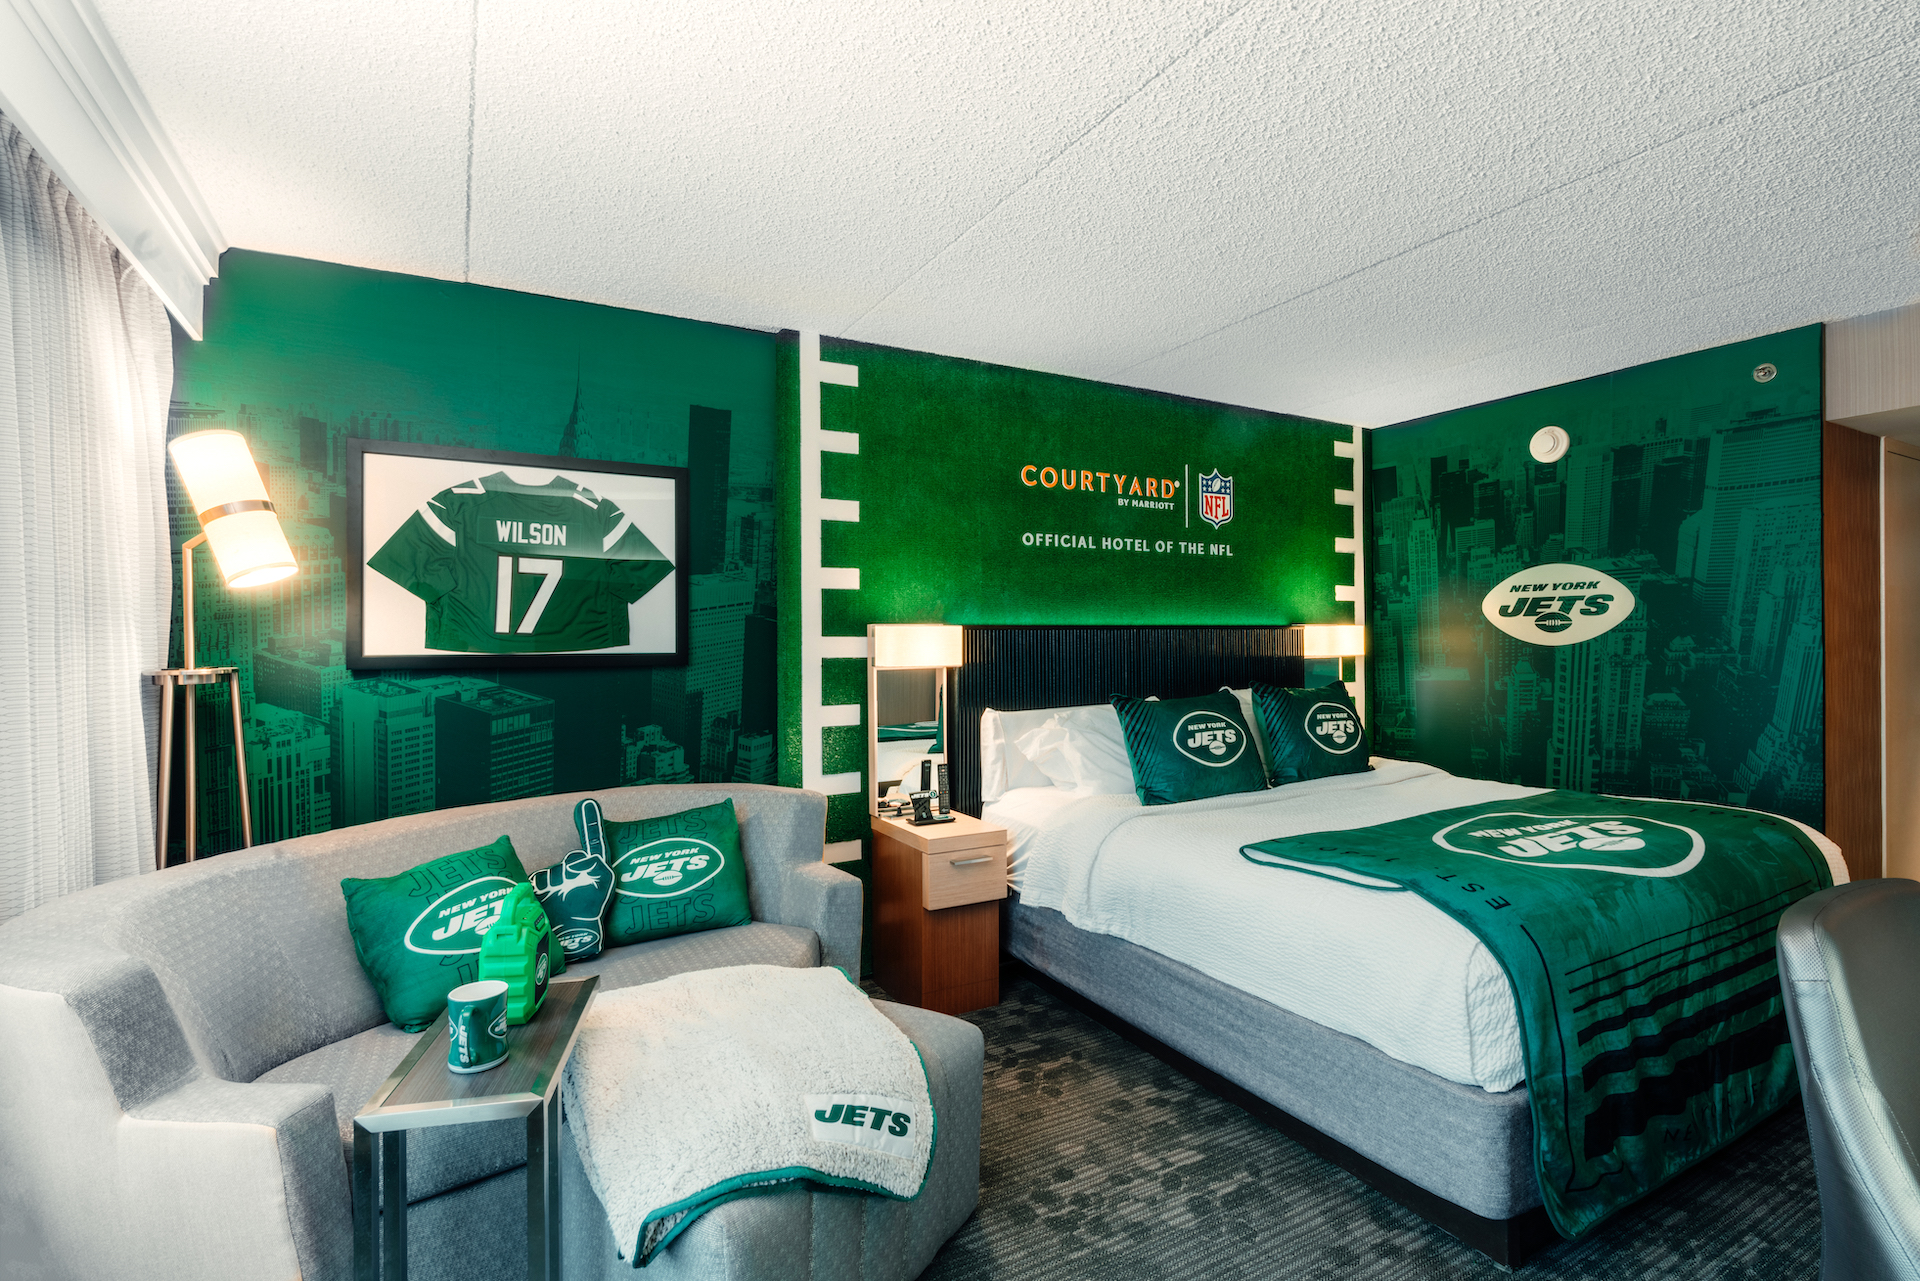 courtyard by marriott fan room decorated in support of the ny jets